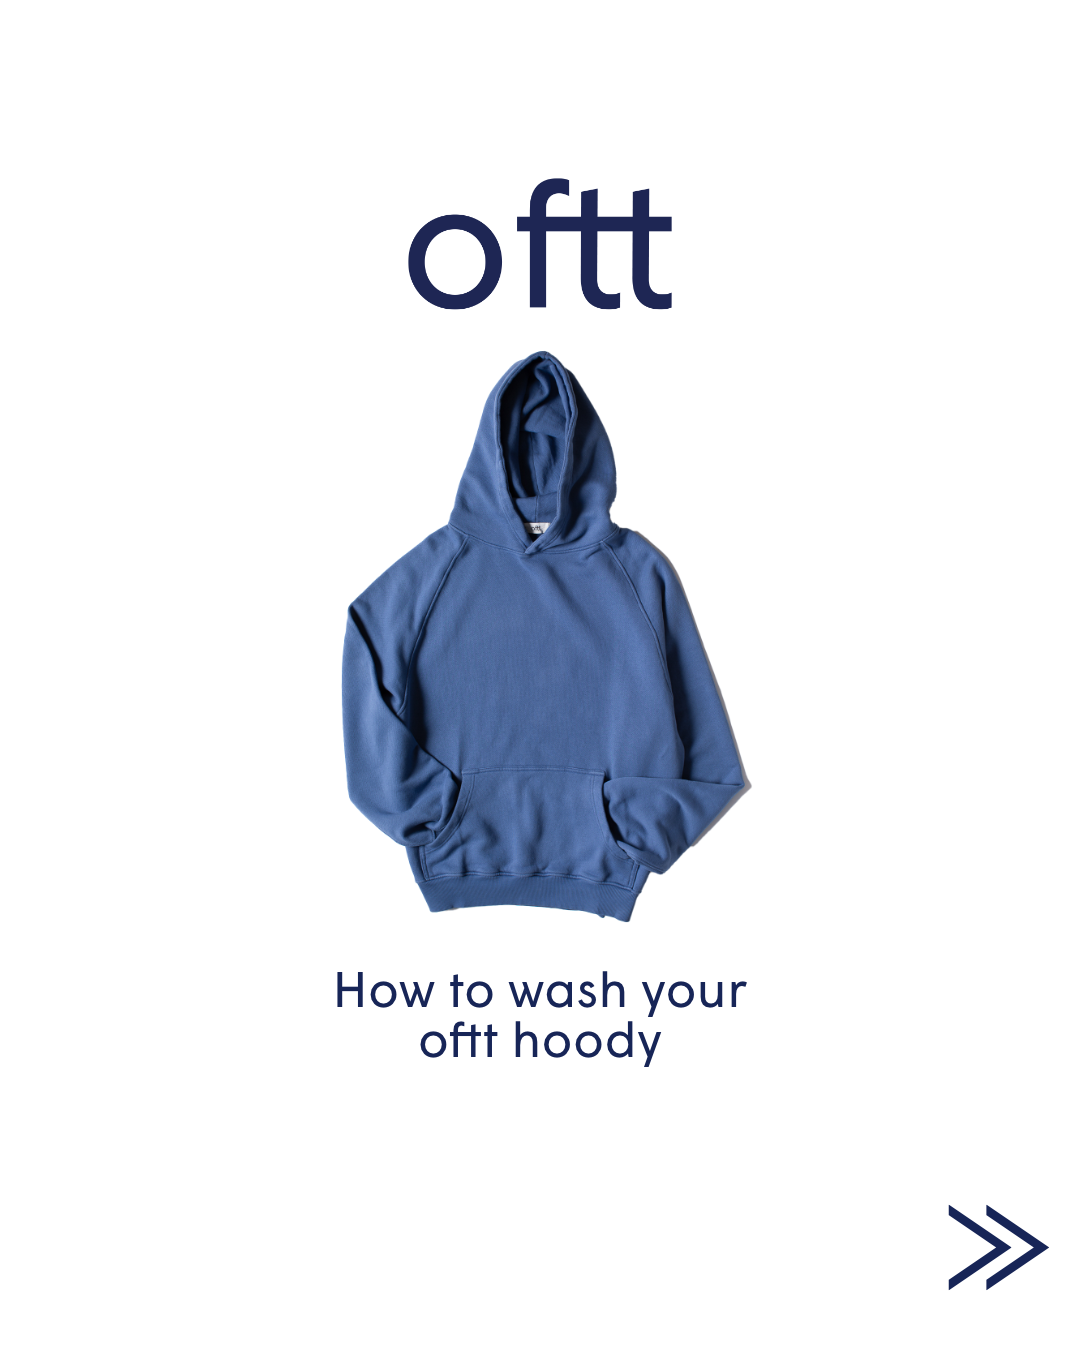 How to wash your oftt hoodie